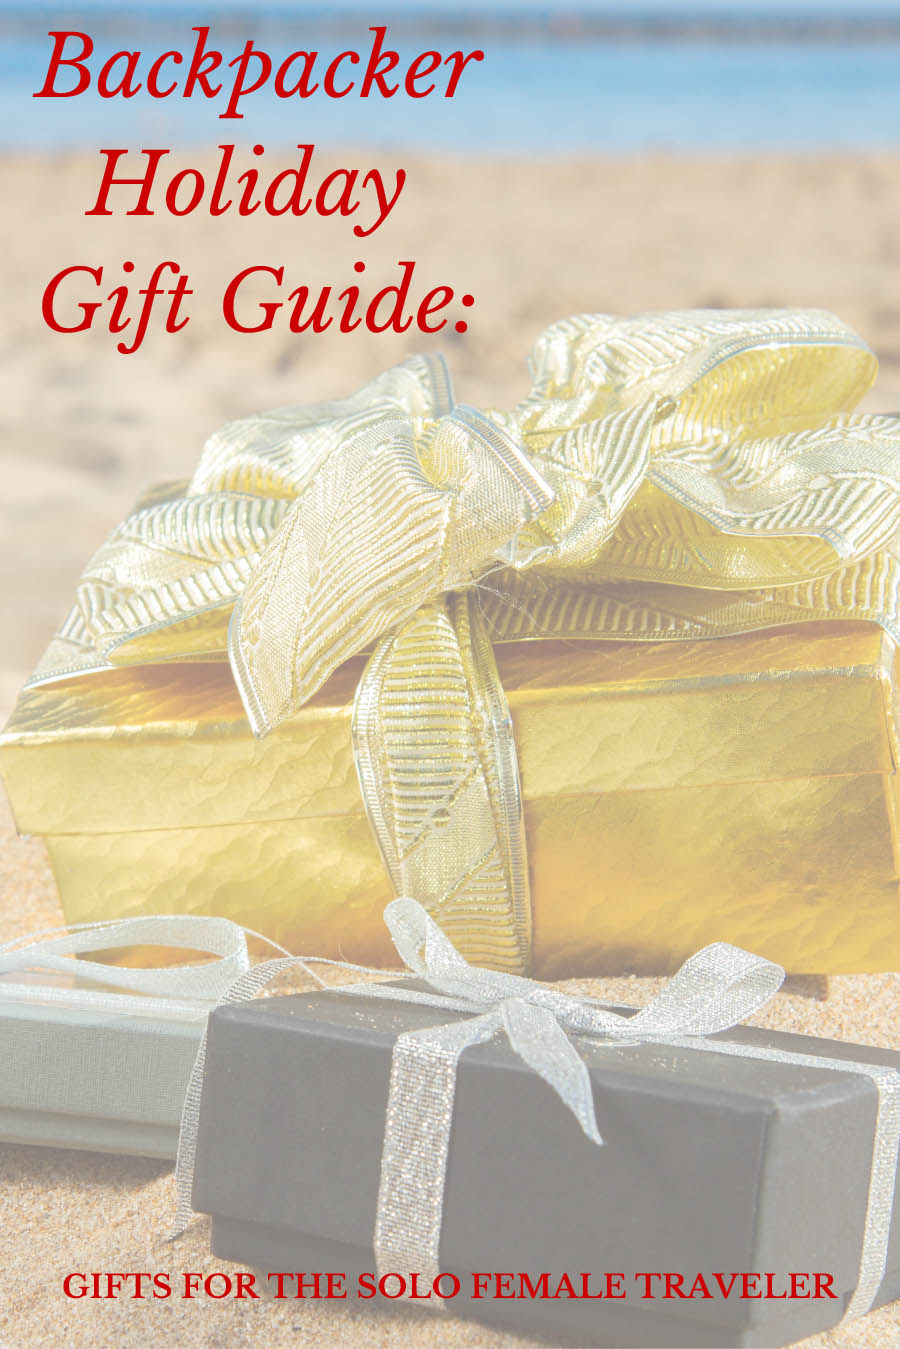 Backpacker Holiday Gift Guide: Gifts for the Solo Female Traveler